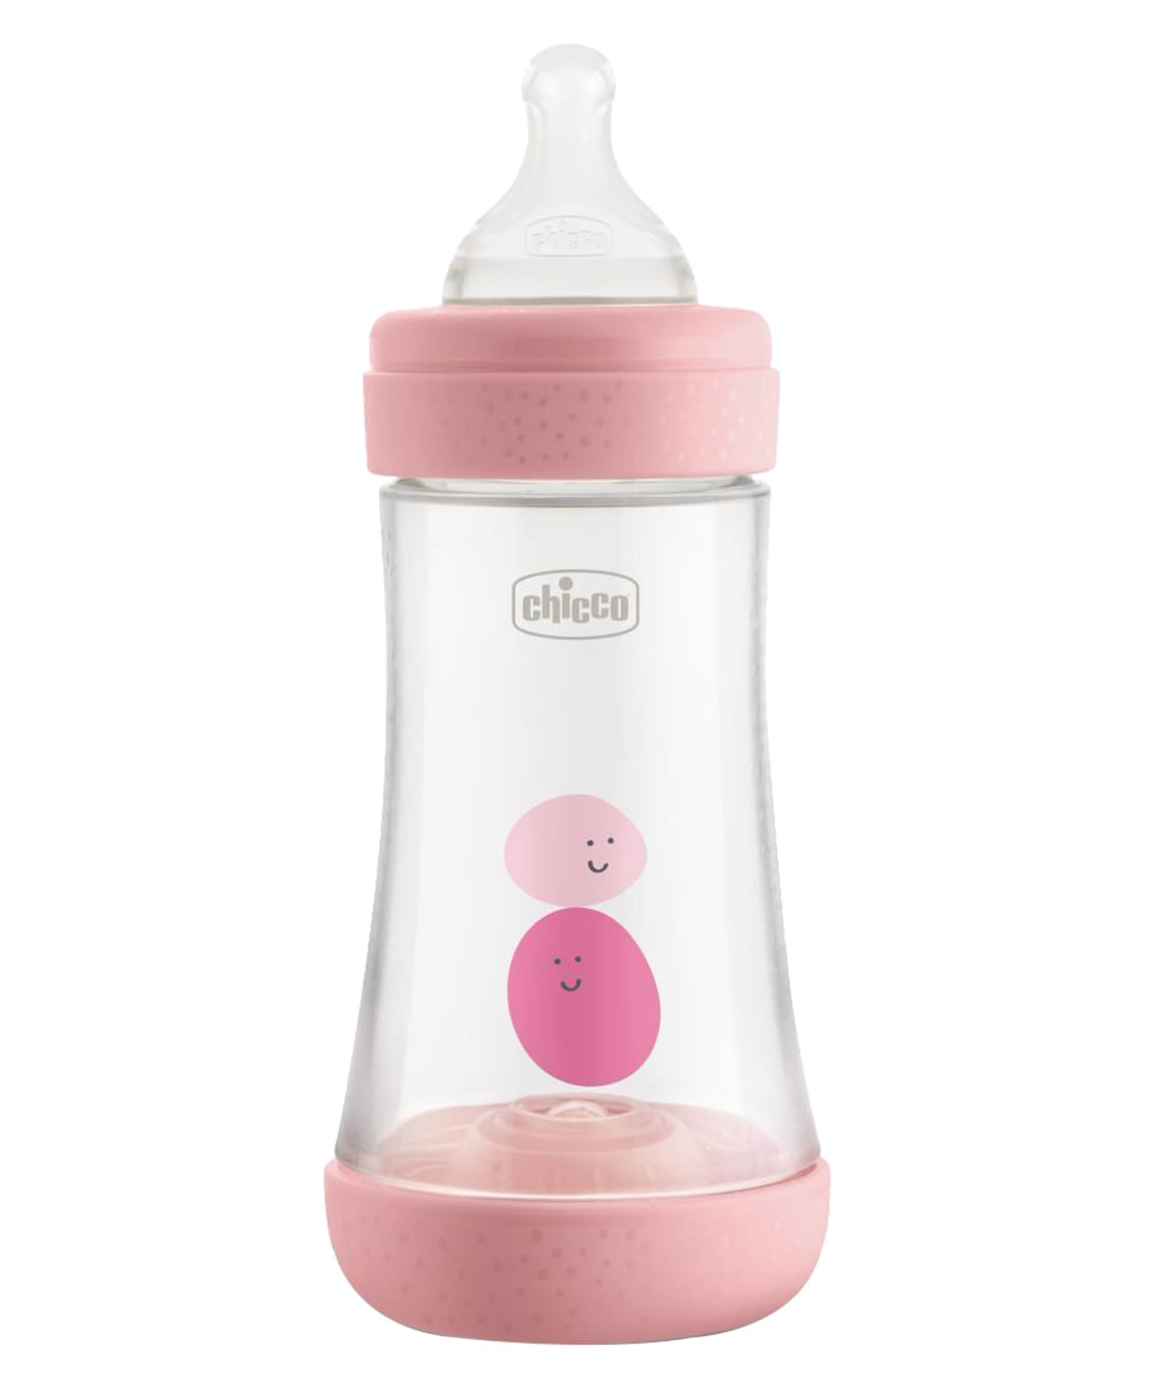 Chicco Chicco 250 ml Feeding Bottle Hygienic Silicone Teat BPA Free Pink pack of 1 